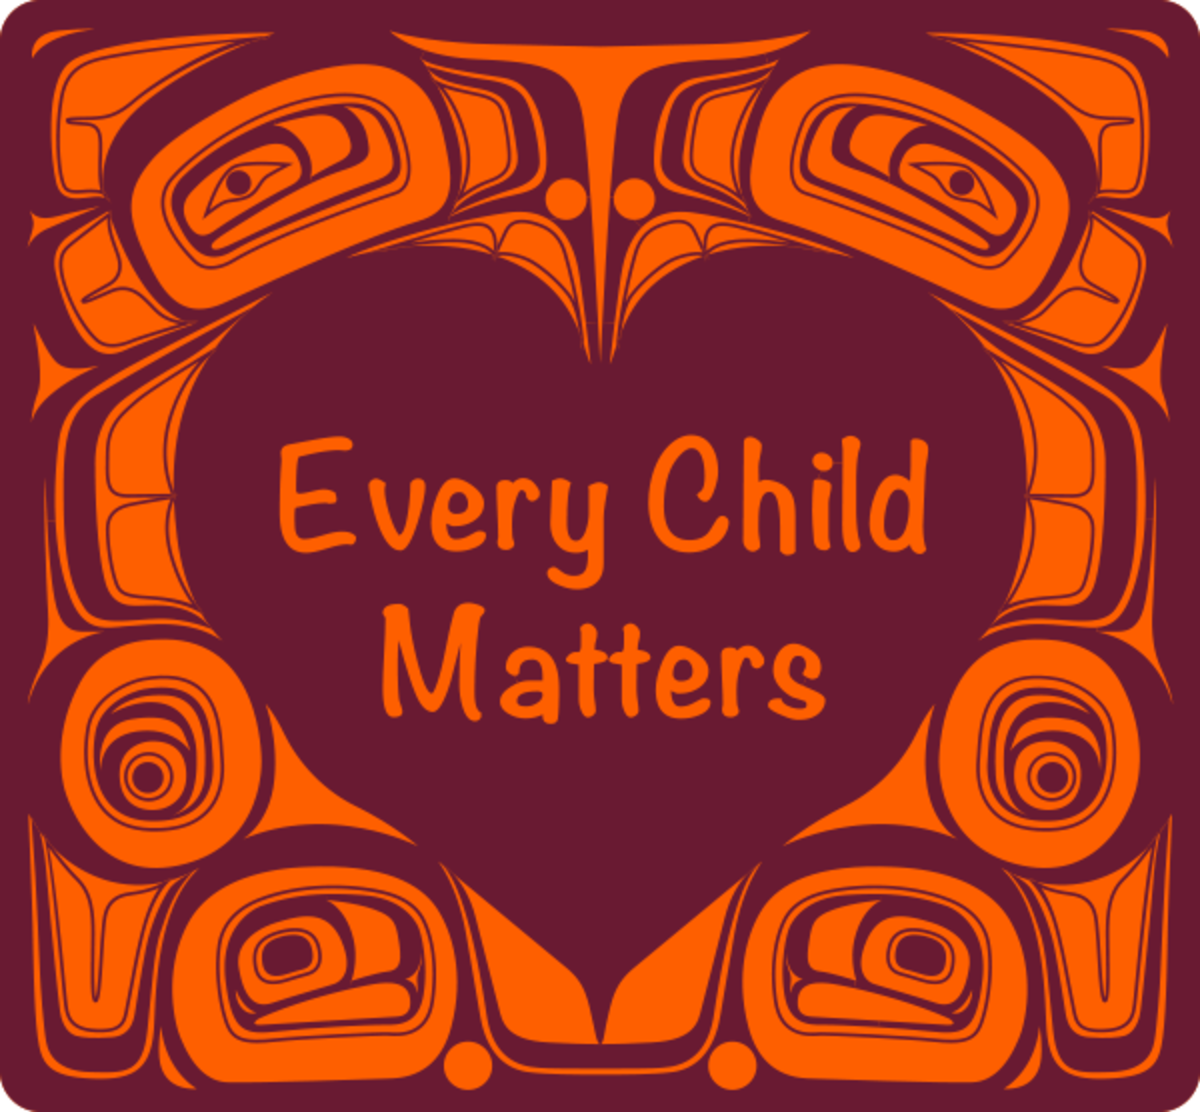 Every Child Matters Temporary Tattoo by Morgan Asoyuf